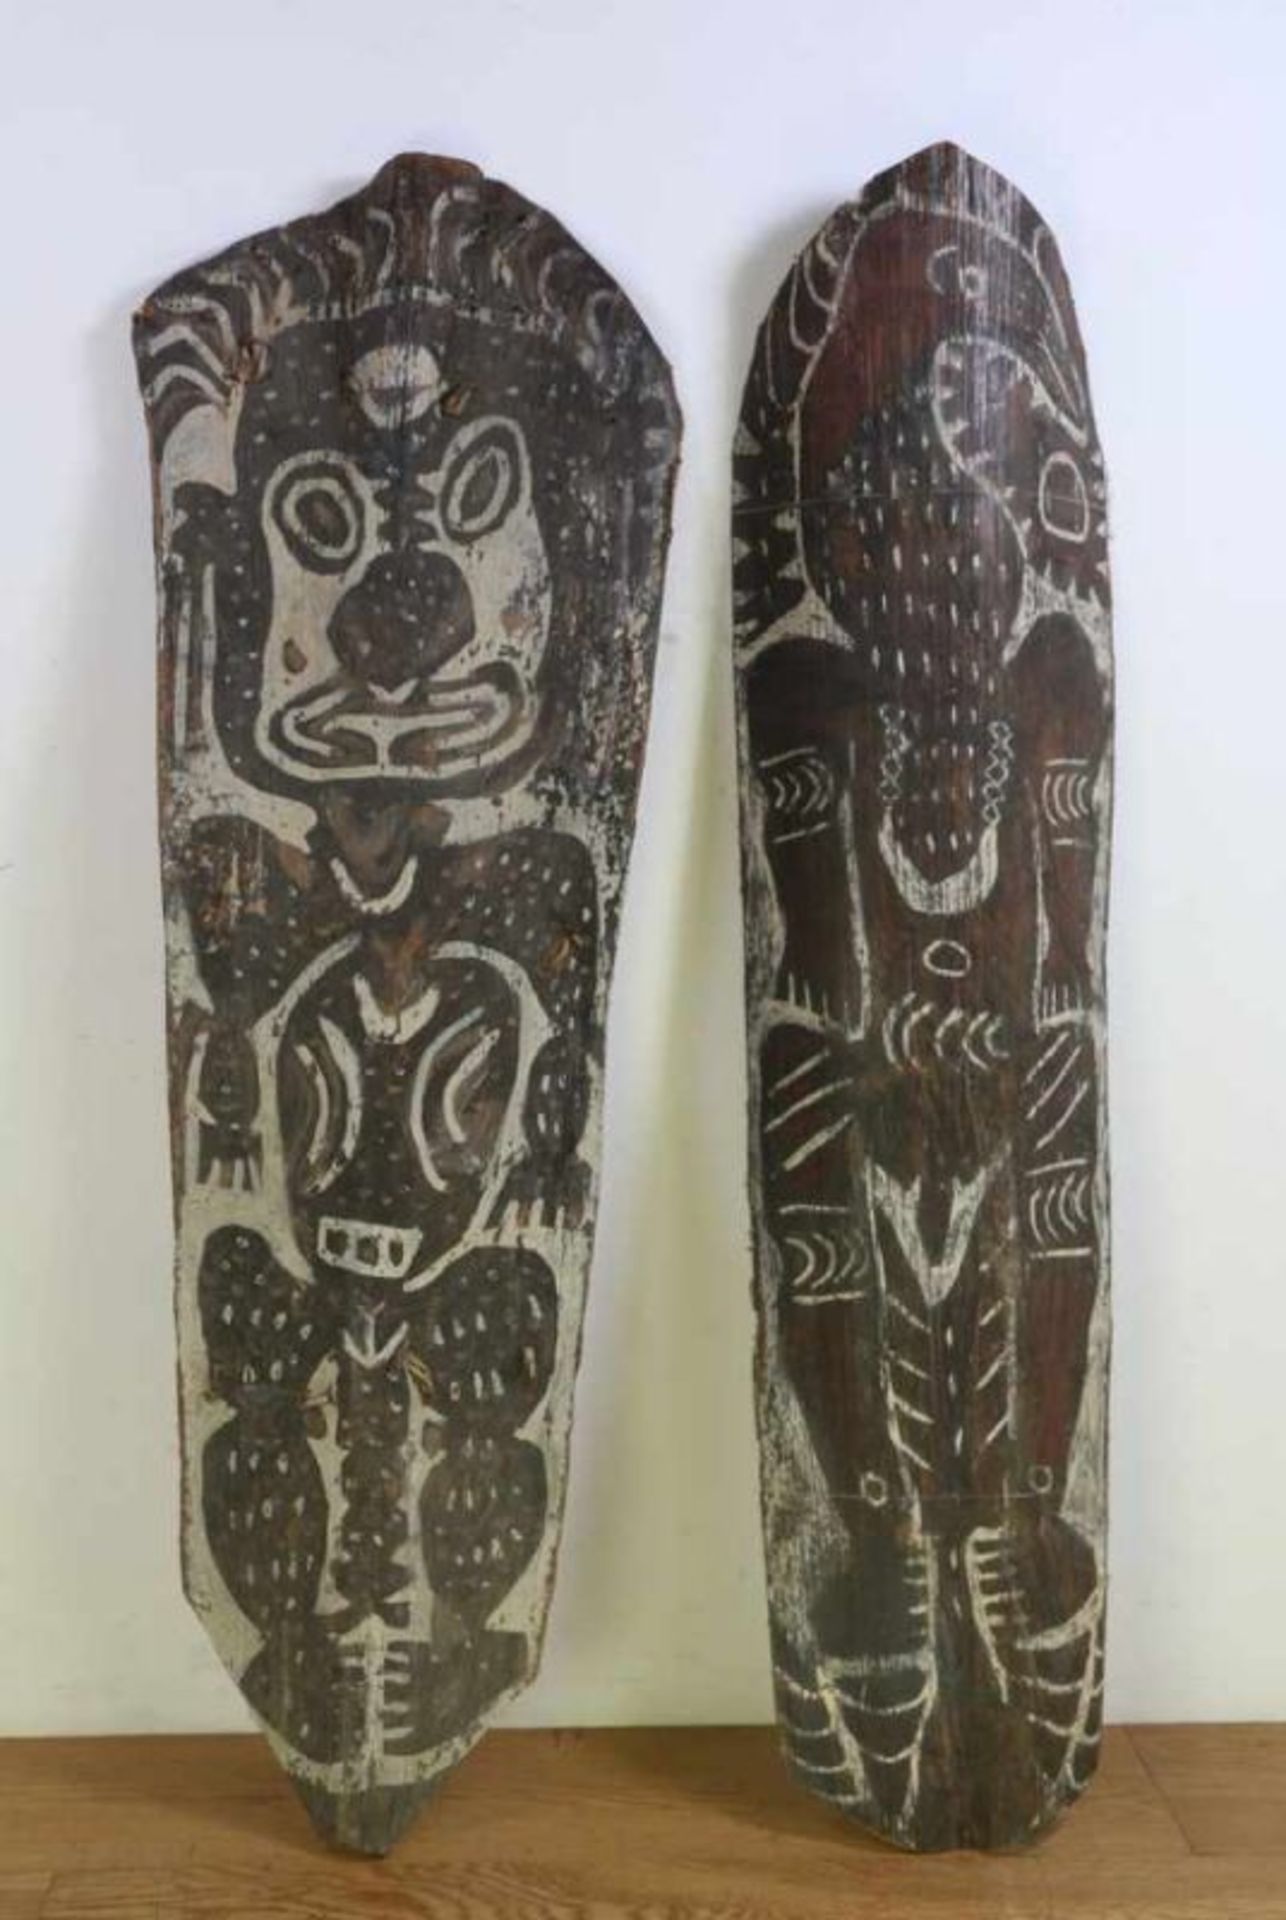 PNG, East Sepik, Keram, two painted bark panels with antropomorf and zoomorf figures.Bark